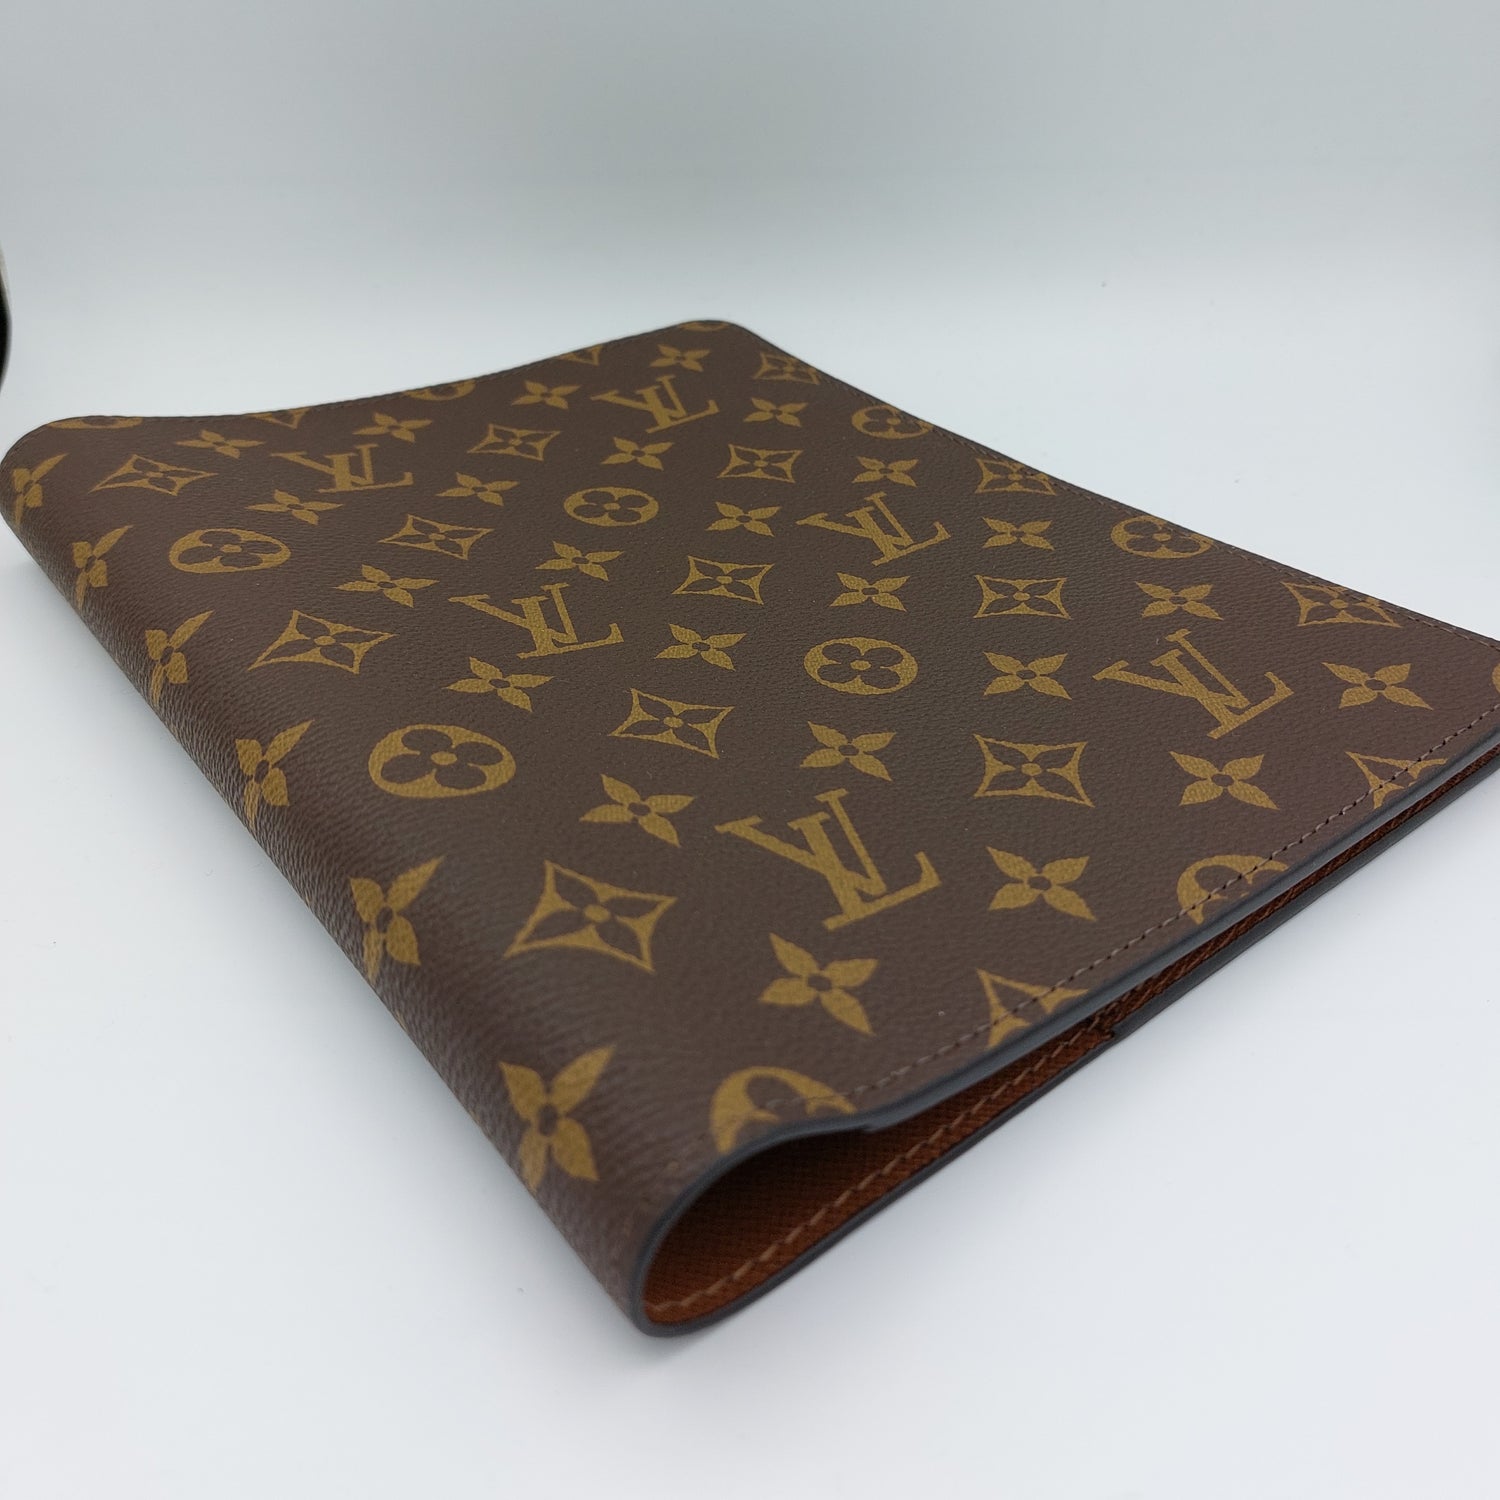 Products By Louis Vuitton: Desk Agenda Cover